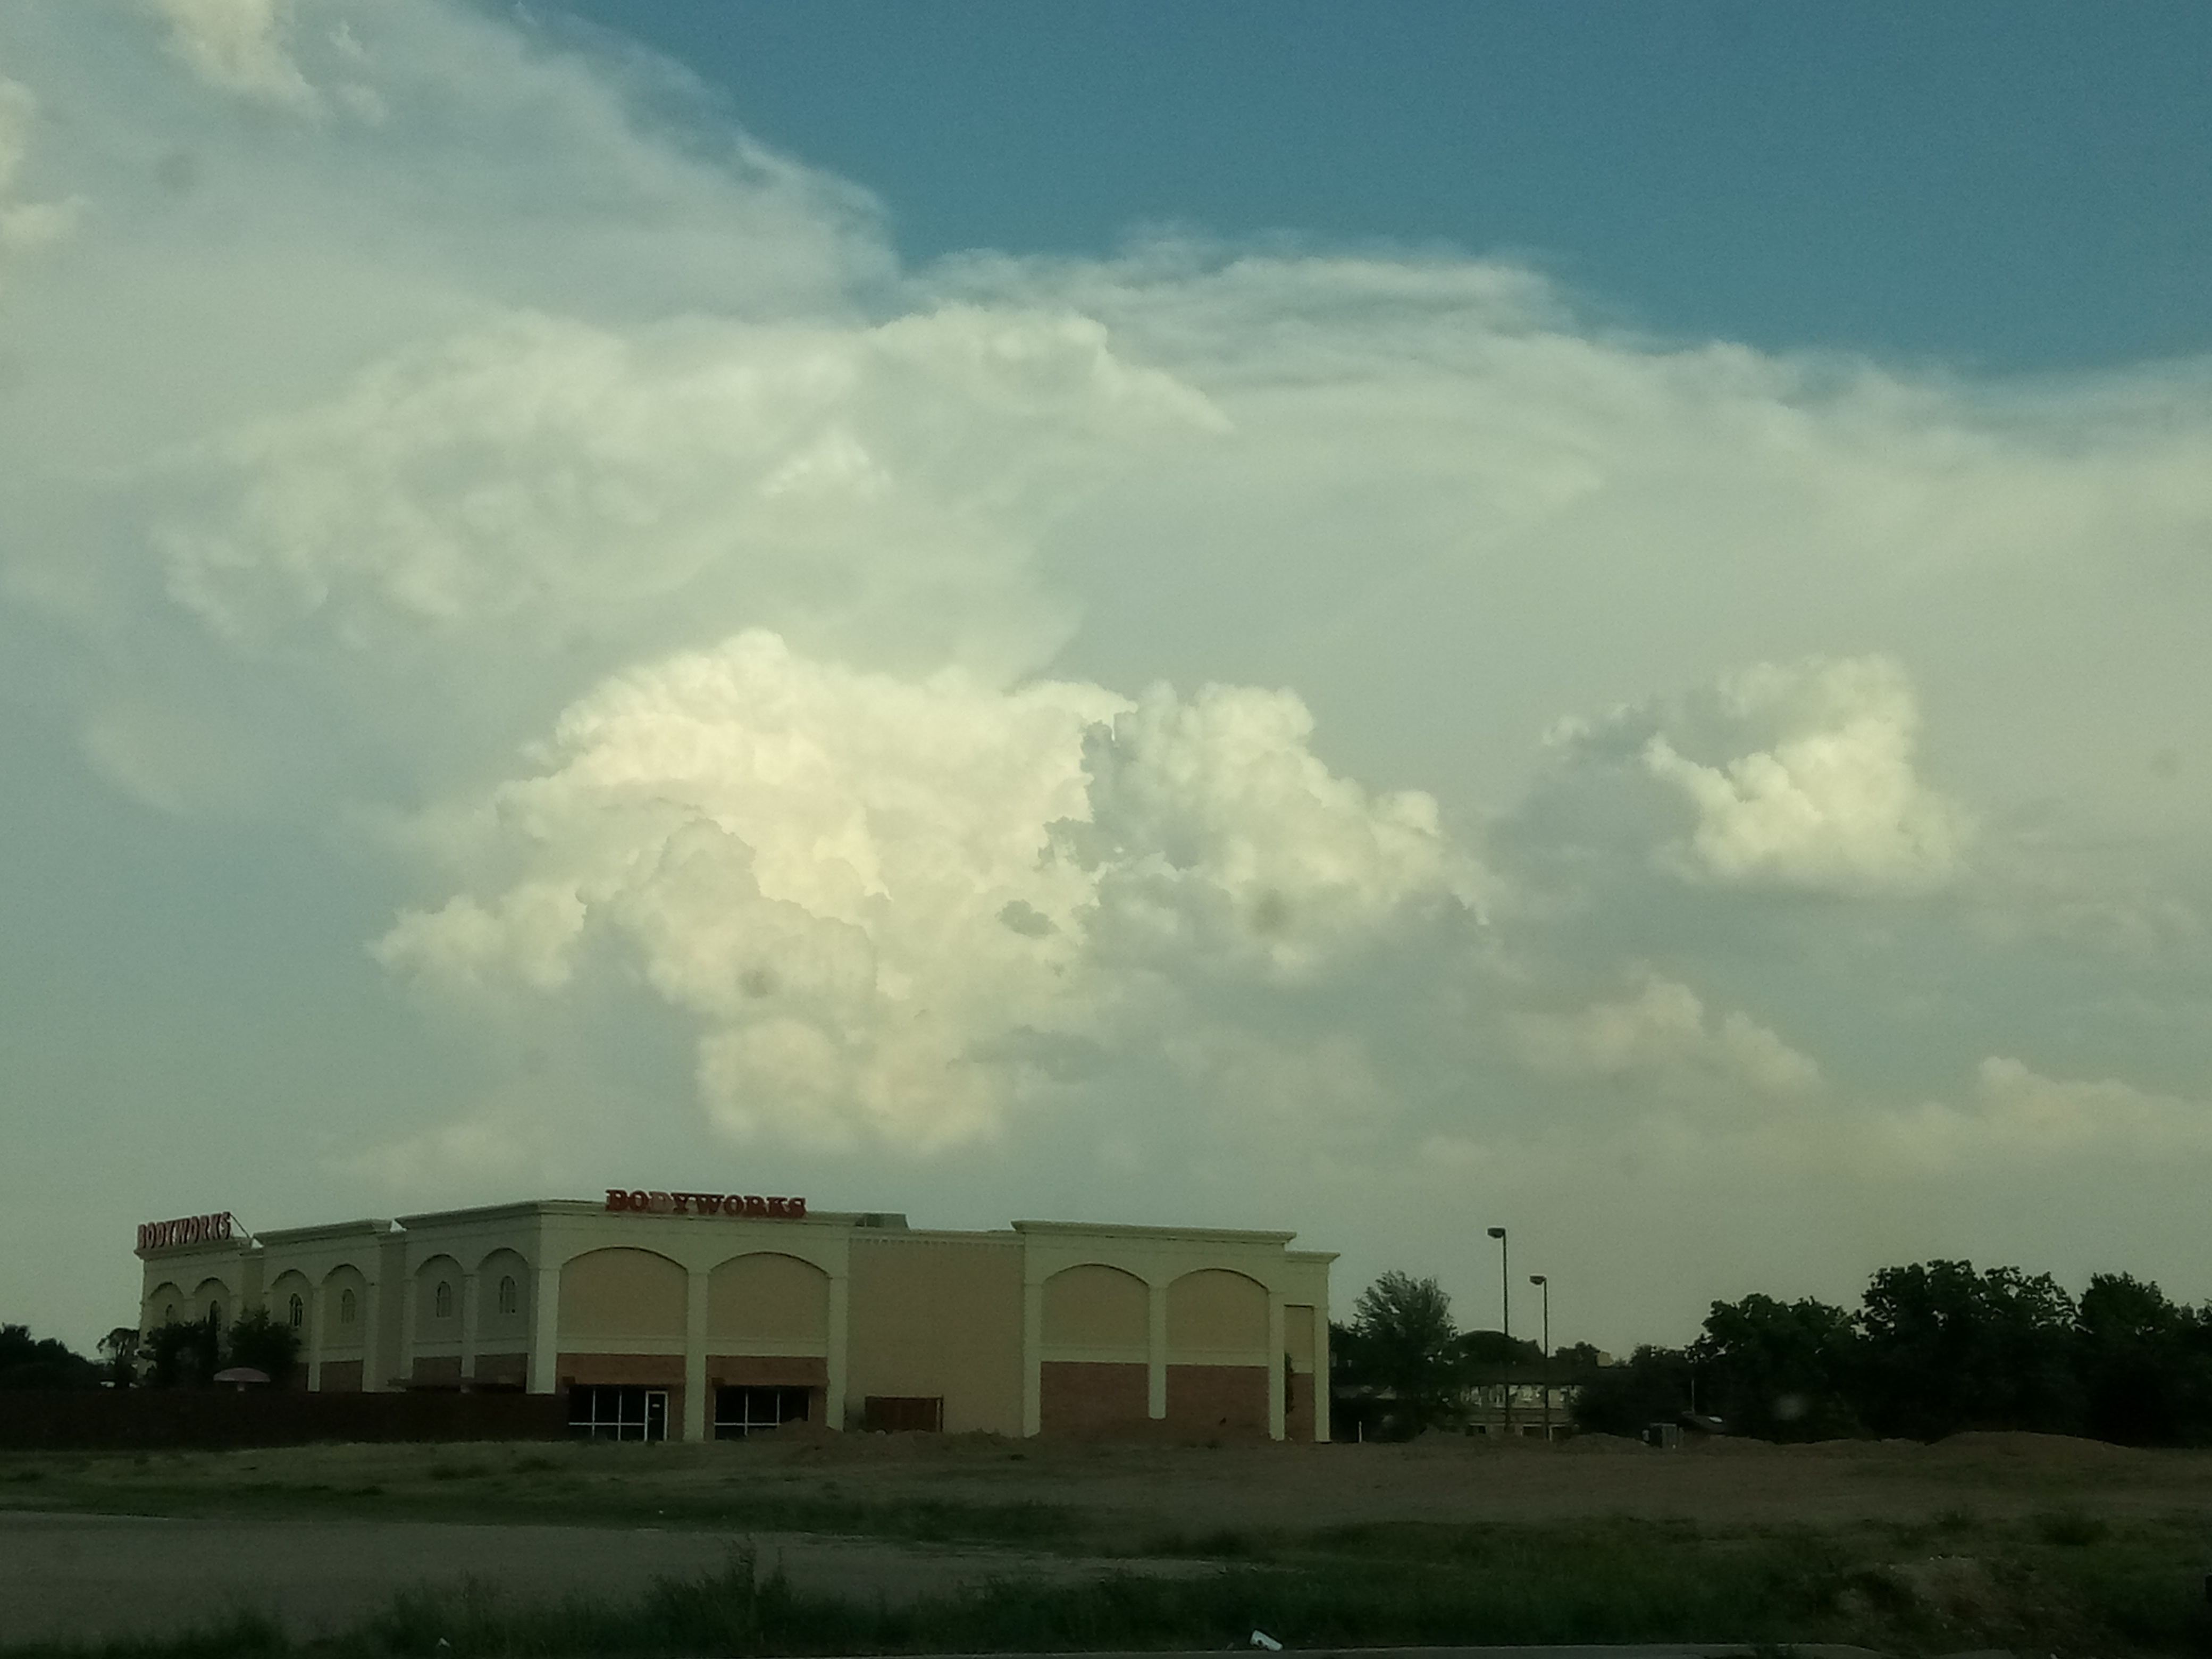 The back side of a severe thunderstorm on the evening of the June 1st. The image is looking east from south Lubbock. 